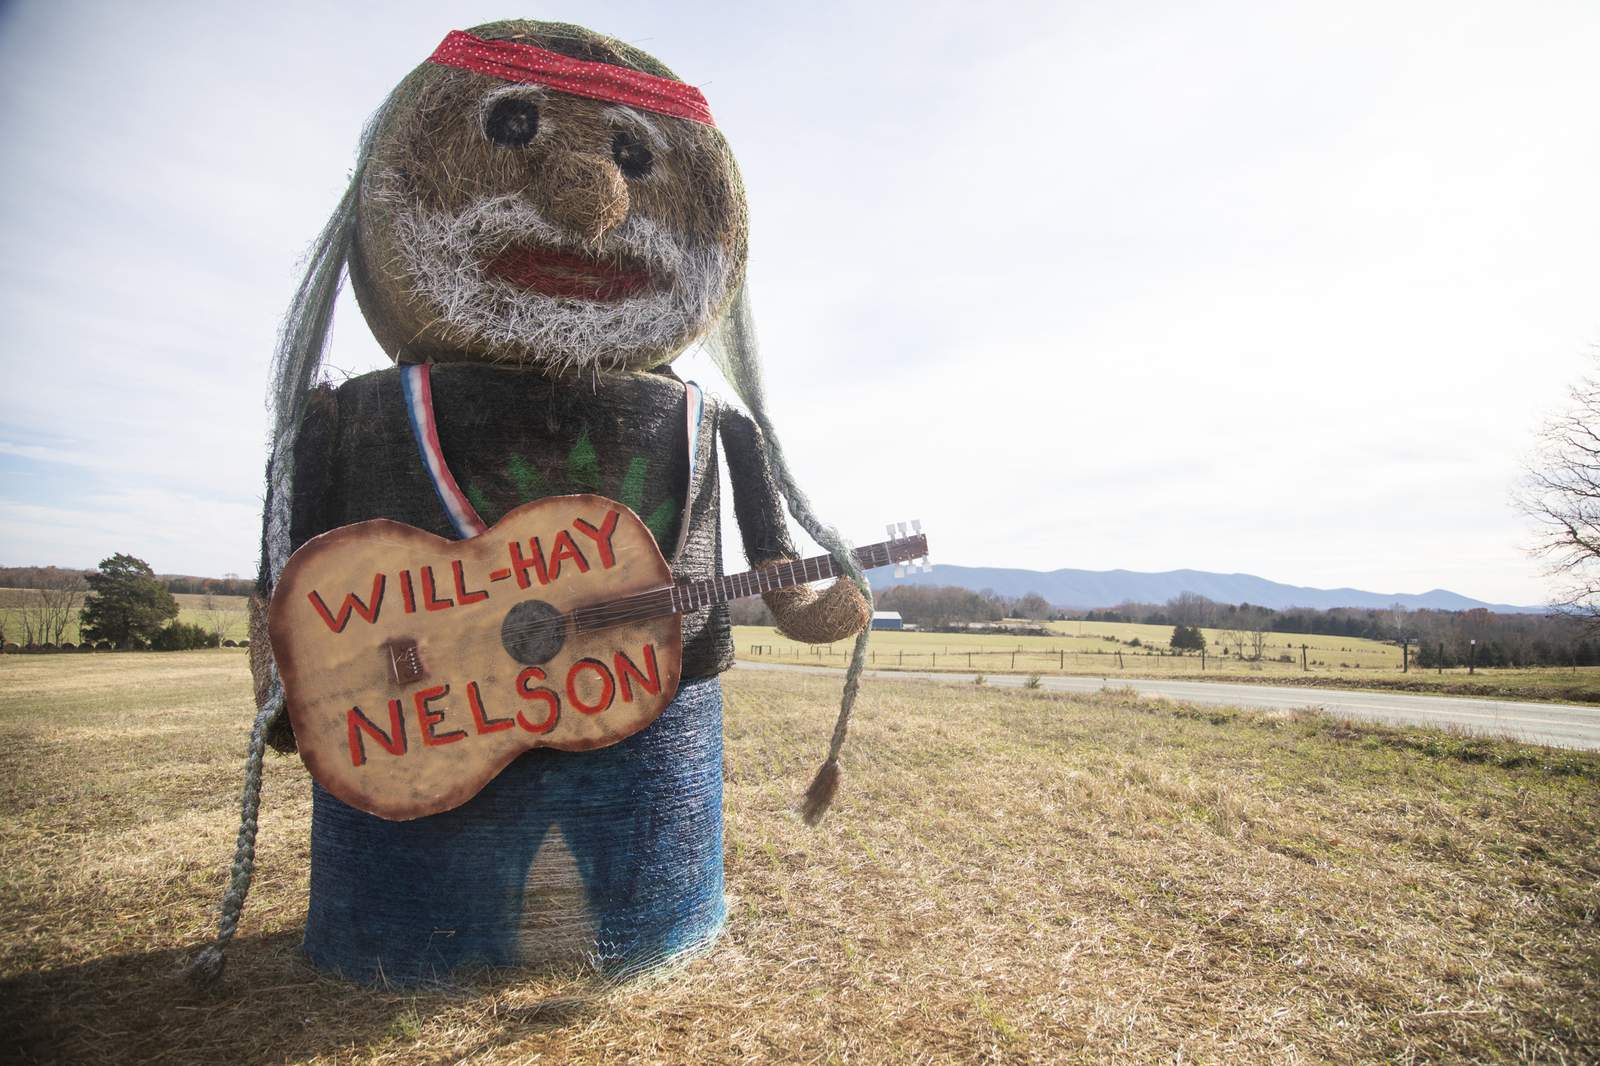 'On the Farm Again' Woman makes hay replica of Willie Nelson